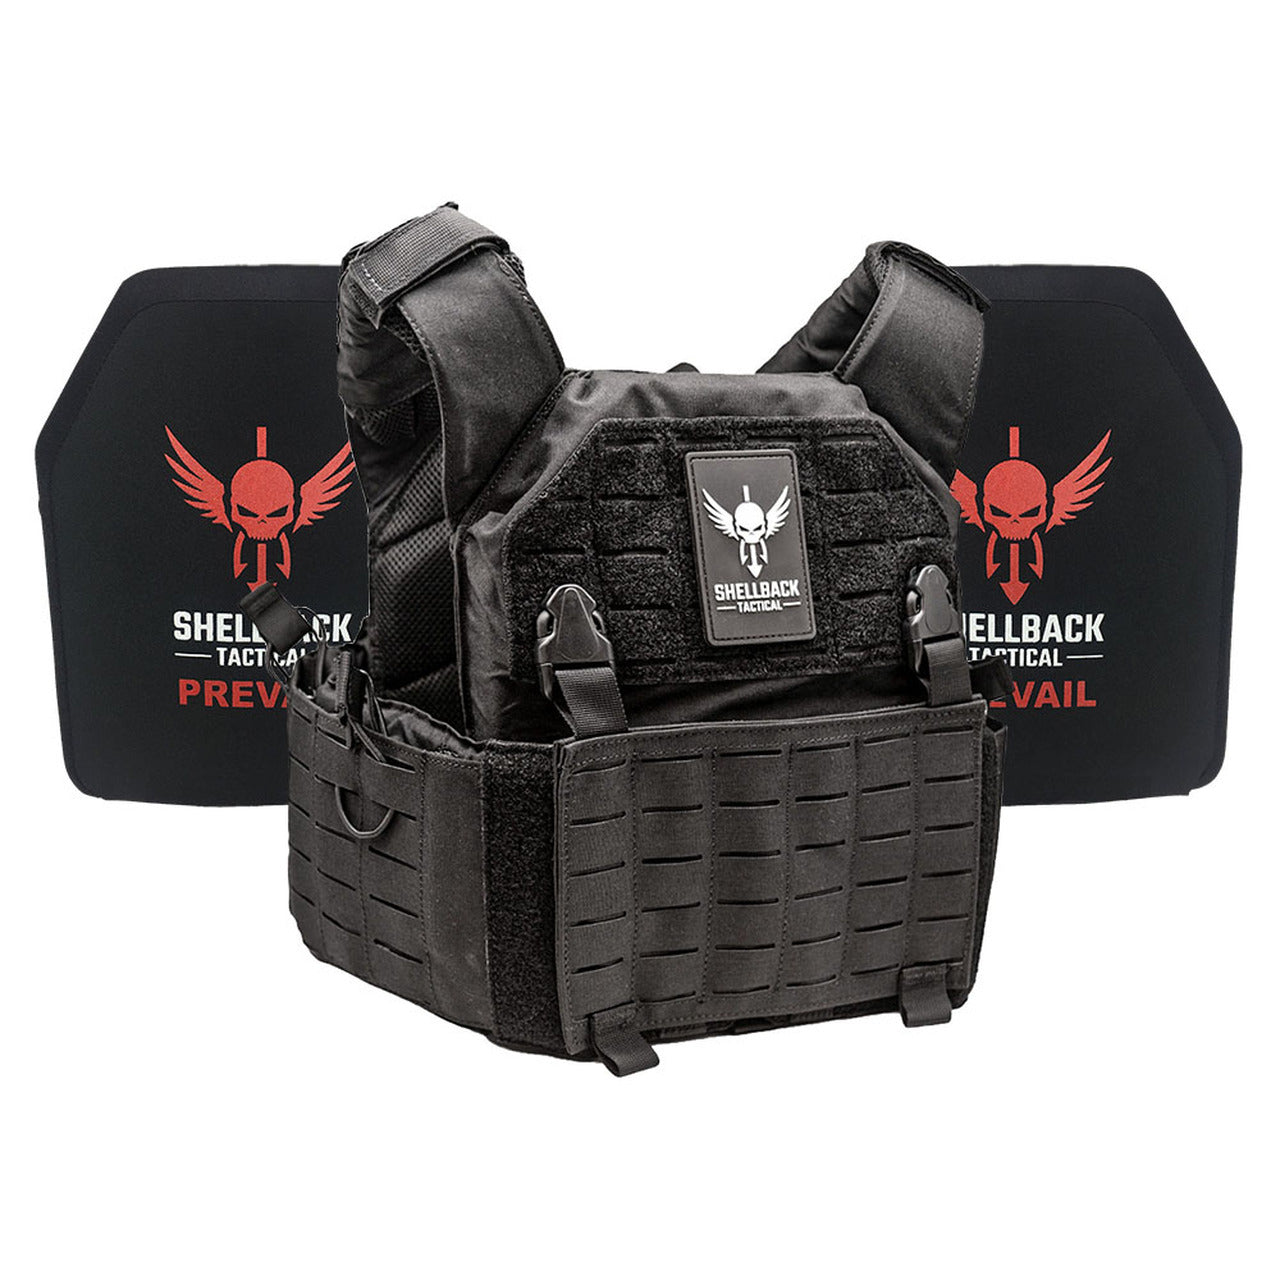 A Shellback Tactical Rampage 2.0 Active Shooter Kit with Level III Single Curve 10 x 12 Hard Armor plate carrier with a red shield on it.